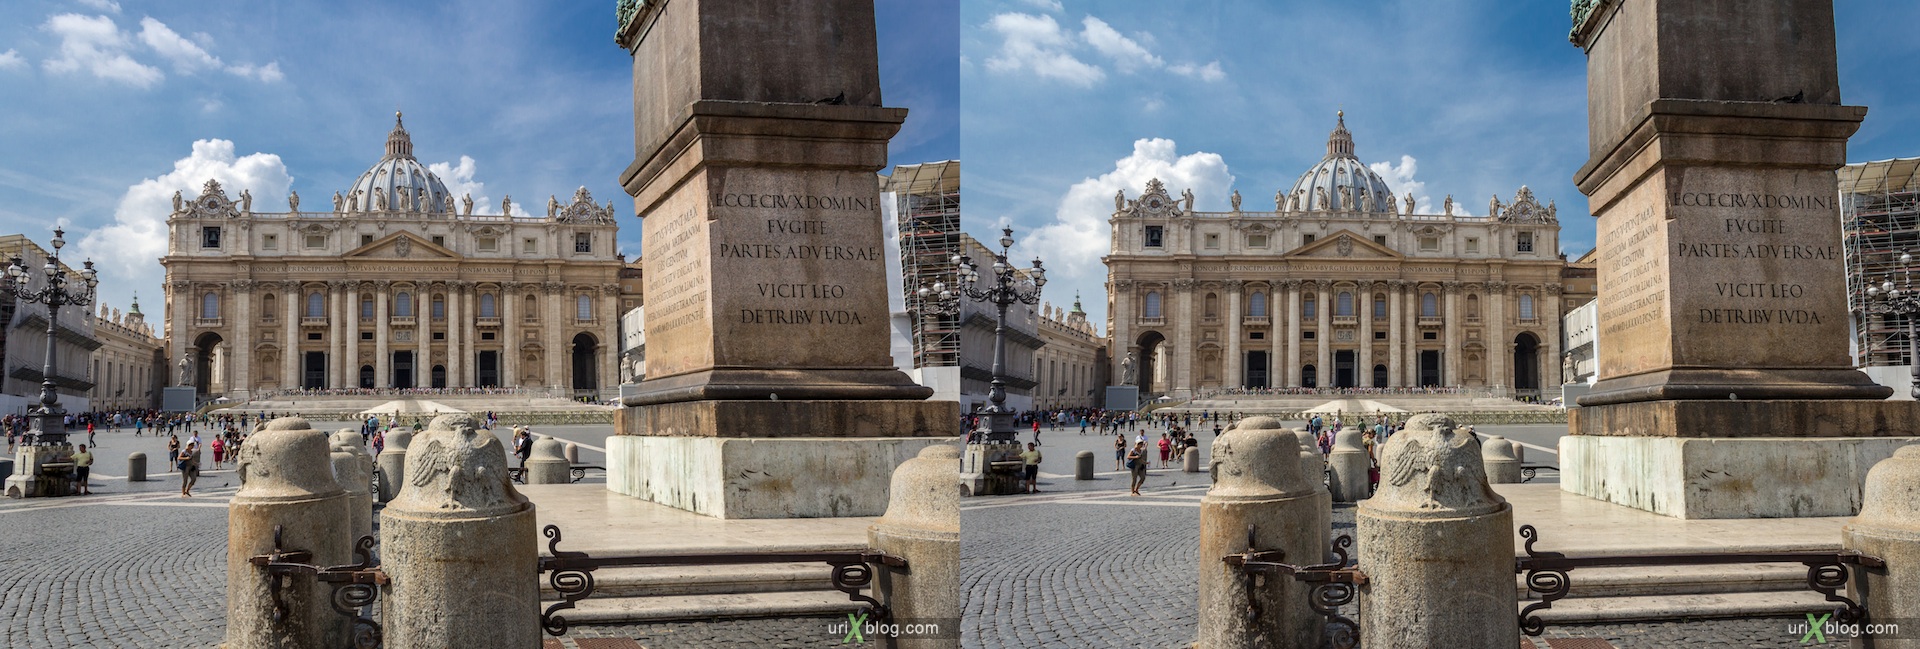 2012, Saint Peter's Square, Vatican, Rome, Italy, 3D, stereo pair, cross-eyed, crossview, cross view stereo pair